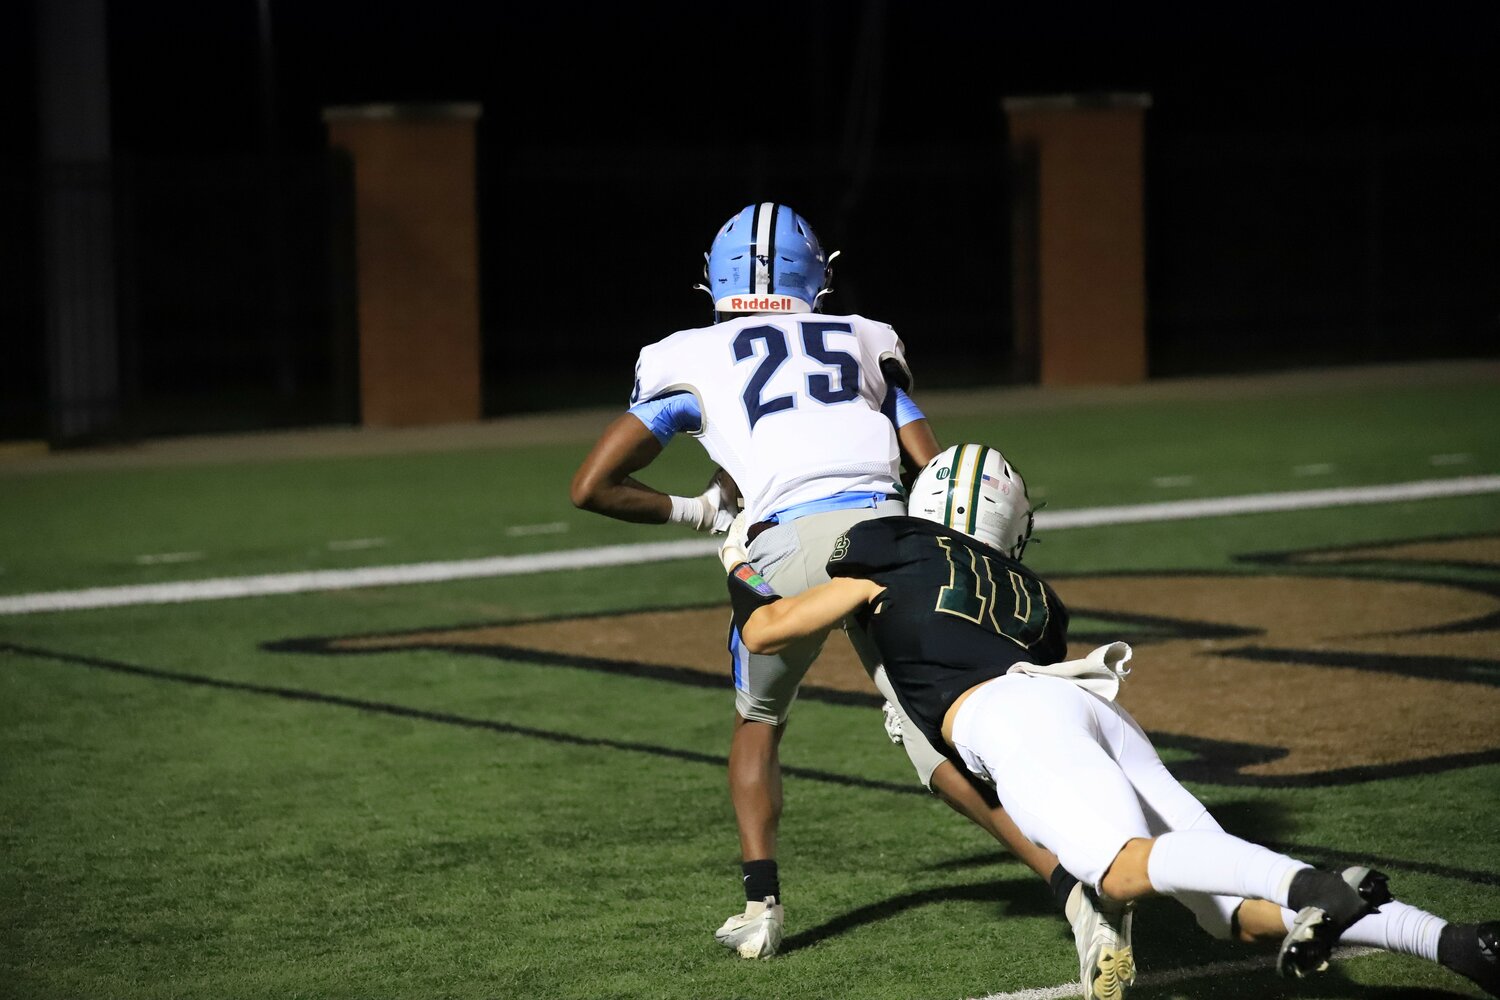 This interception that was returned for a touchdown for Dorman put them up 28-16 with a little over ten minutes to play. They would not score the rest of the game and River Bluff escaped with a 29-28 win.